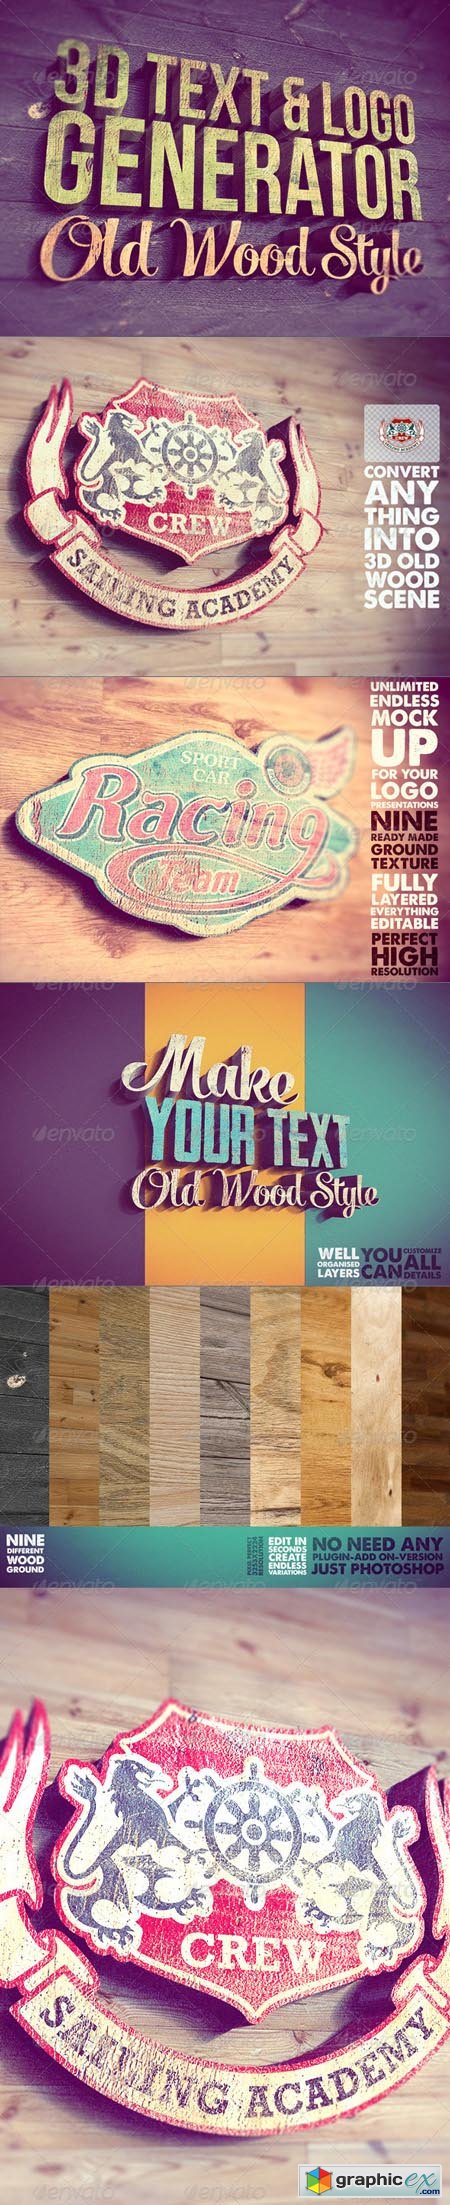 Download 3D Text Logo Generator 2 » Free Download Vector Stock Image Photoshop Icon